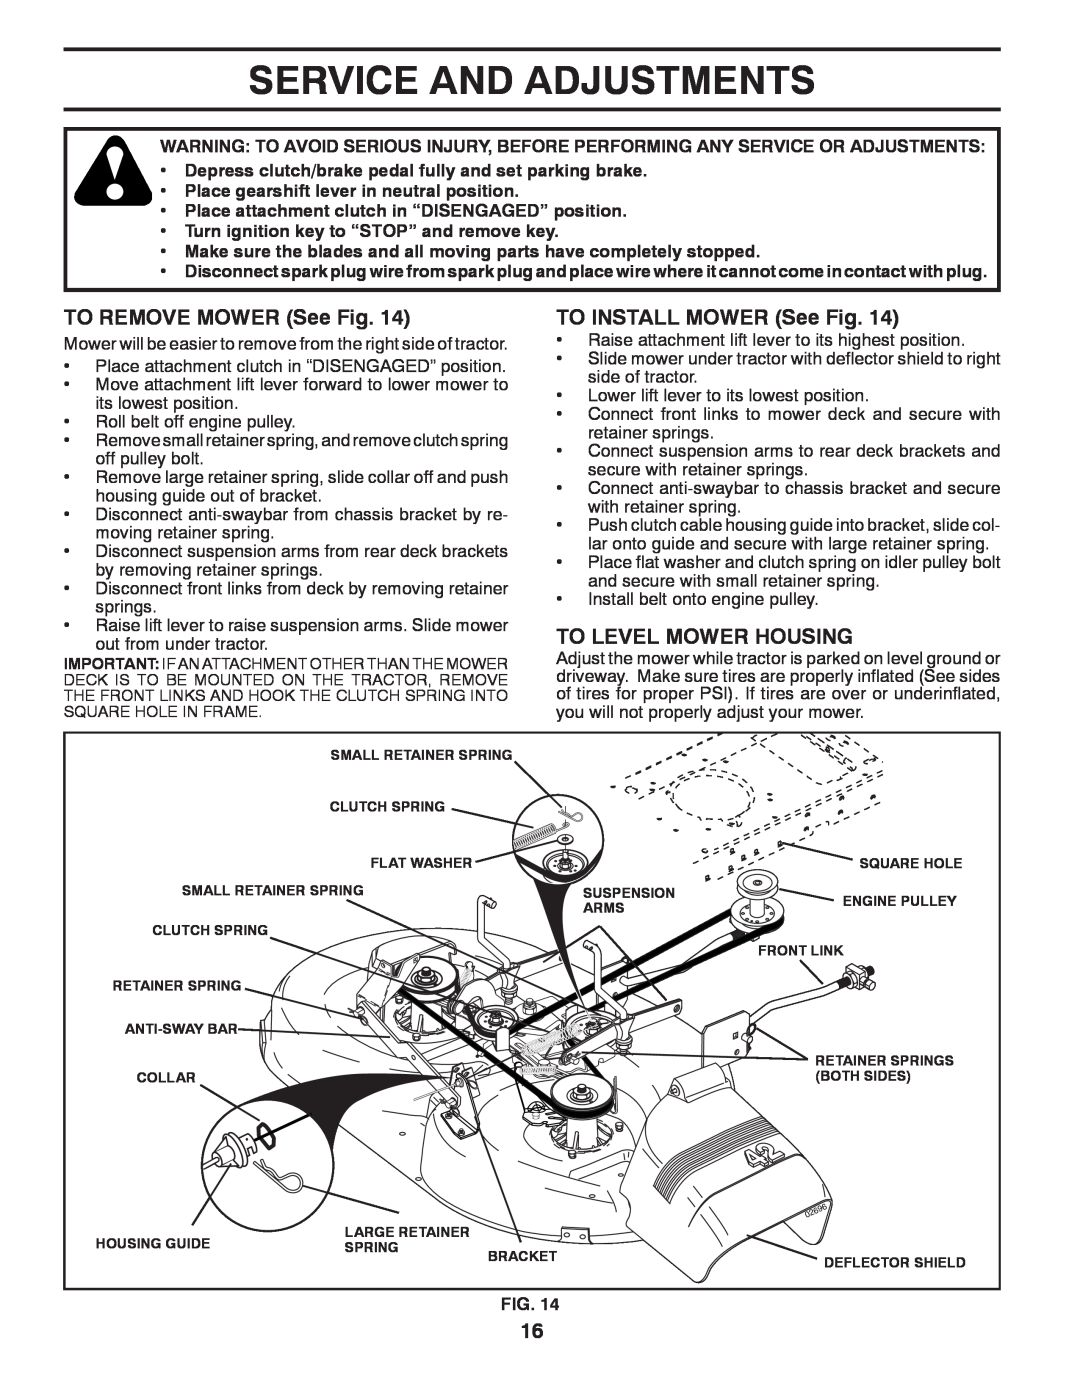 Poulan 424634 manual Service And Adjustments, TO REMOVE MOWER See Fig, TO INSTALL MOWER See Fig, To Level Mower Housing 